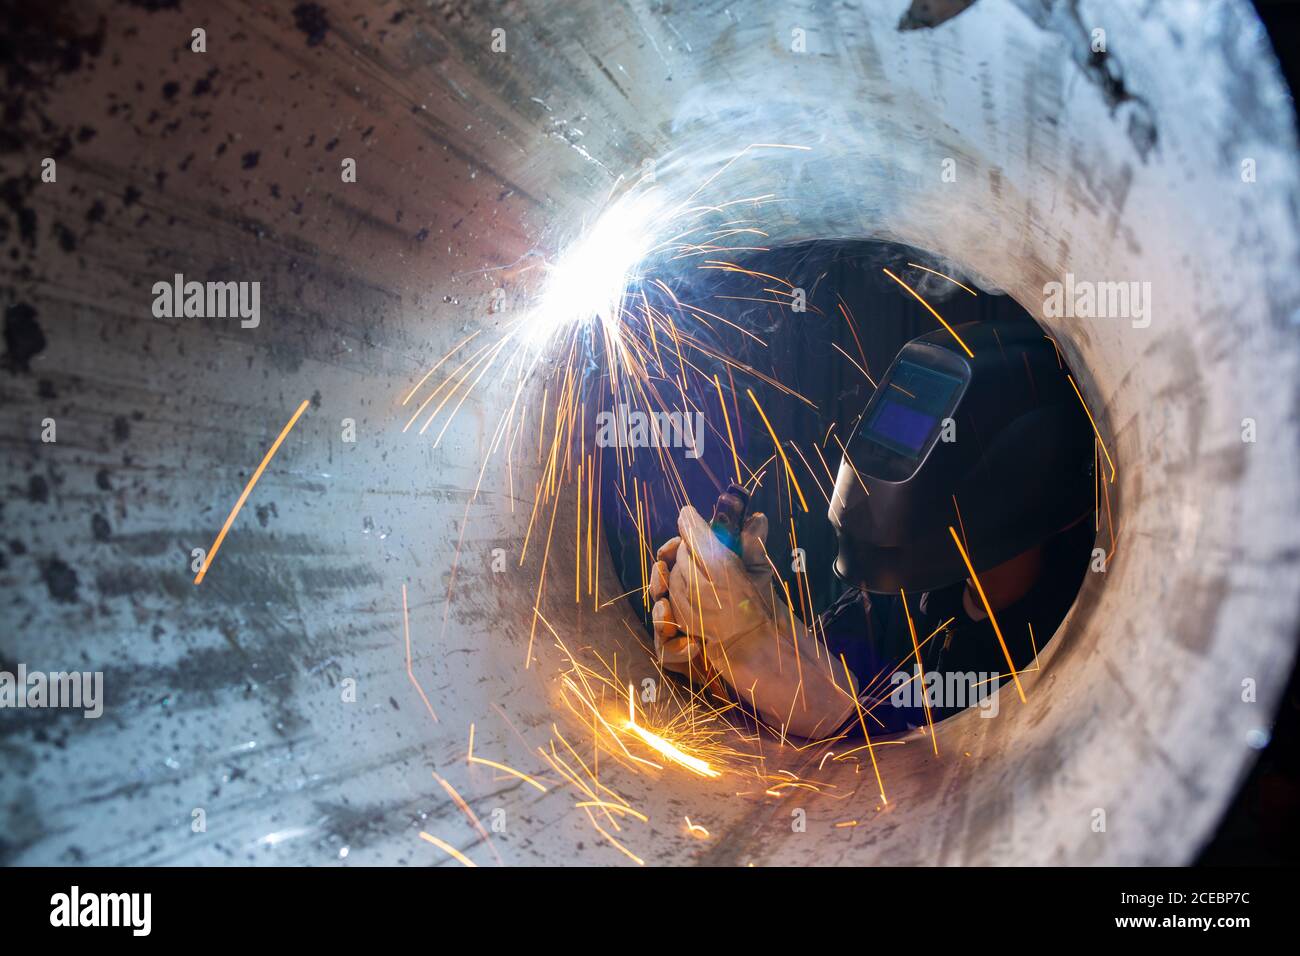 Asian workers wearing safety first uniforms and Welded Iron Mask at Steel welding plants, industrial safety first concept. Stock Photo